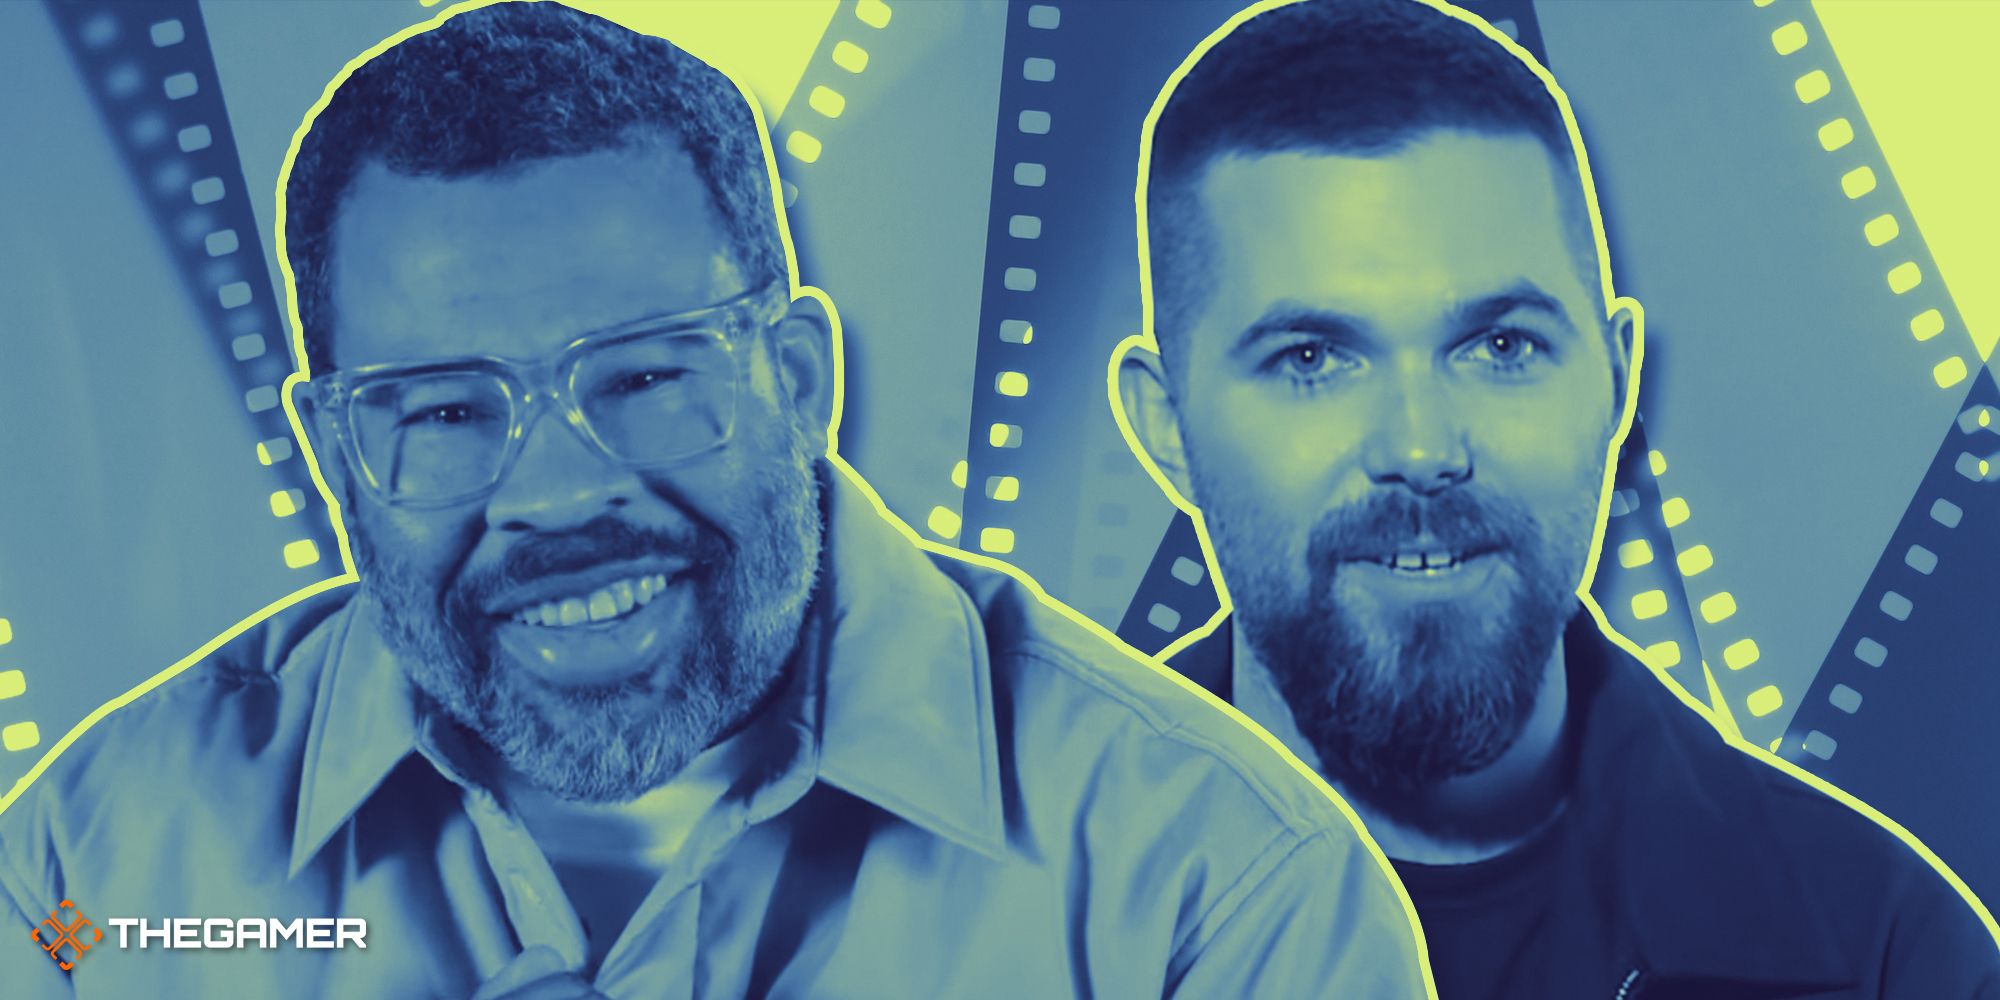 Jordan Peele and Robert Eggers smiling with film strips in the background. The picture is in black and white, with green highlights.